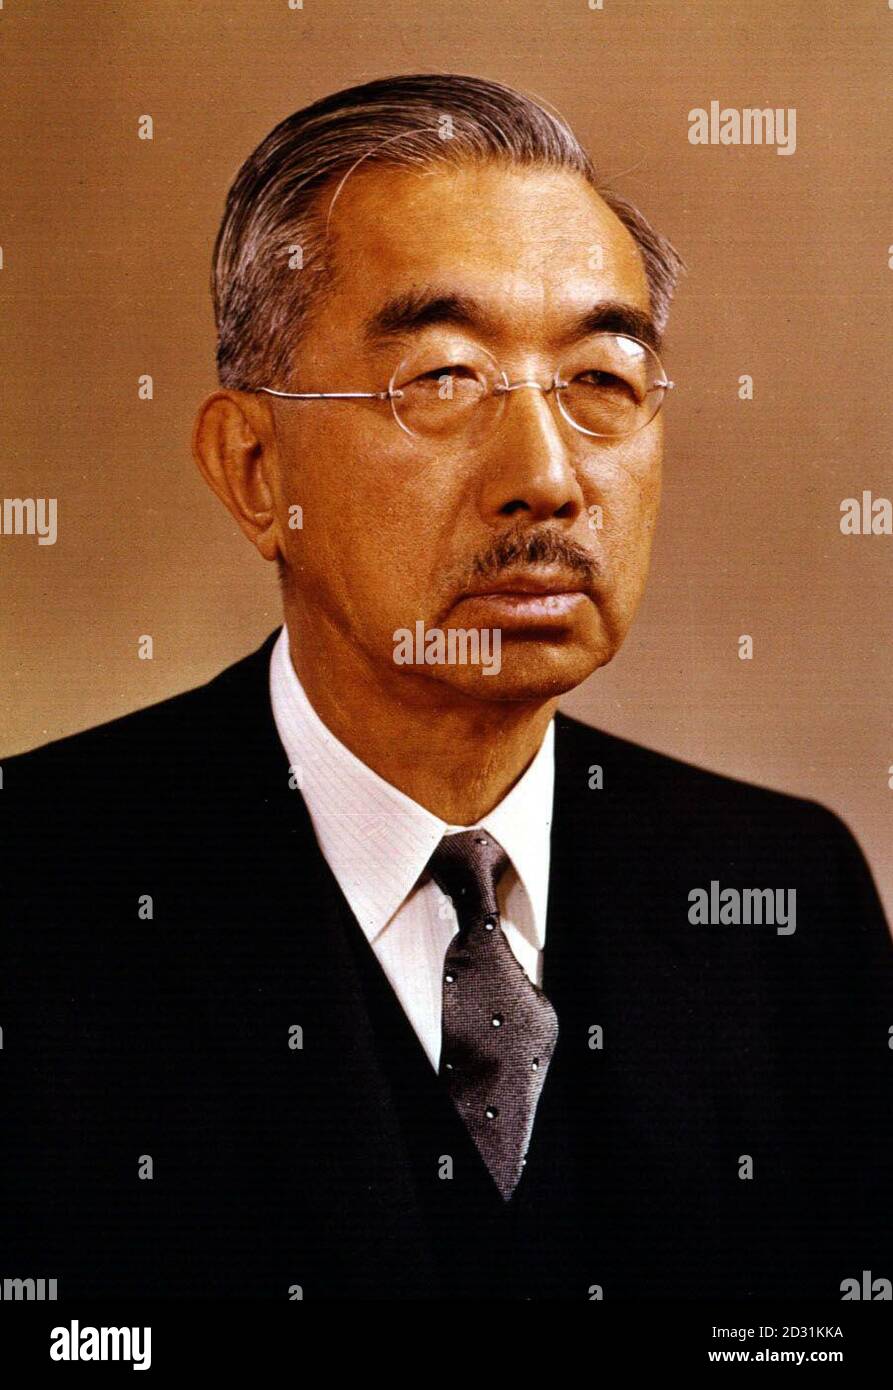 EMPEROR HIROHITO 1971: Hirohito (1901-1989) was Emperor of Japan from 1926 until his death in 1989. He was regarded as a divine monarch by his people until Japan's defeat in the Second World War led to the creation of a constitutional monarchy. Stock Photo